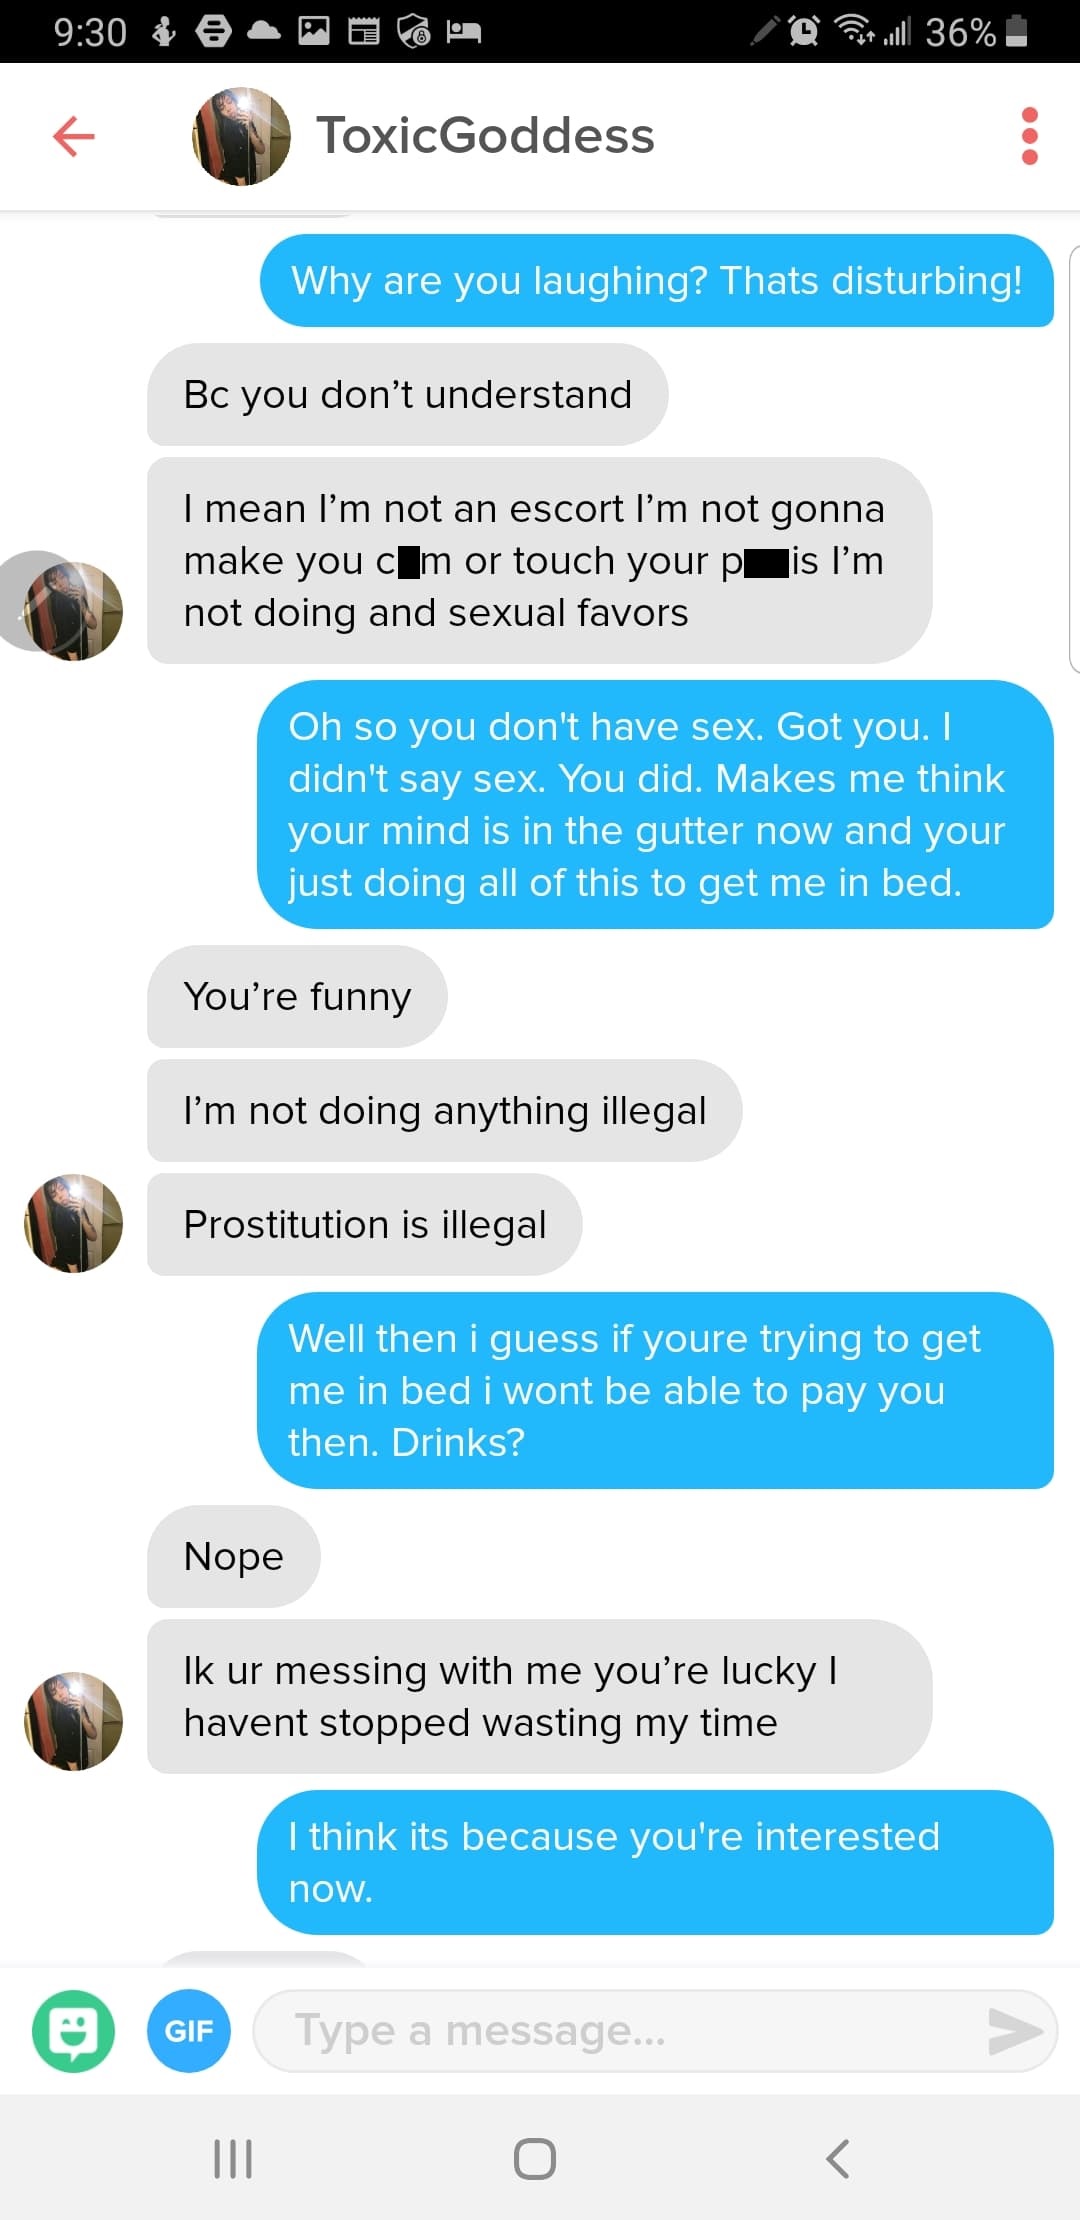 gold diggers on tinder - O Per ull 36% f ToxicGoddess Why are you laughing? Thats disturbing! Bc you don't understand I mean I'm not an escort I'm not gonna make you c m or touch your p is I'm not doing and sexual favors Oh so you don't have sex. Got you.